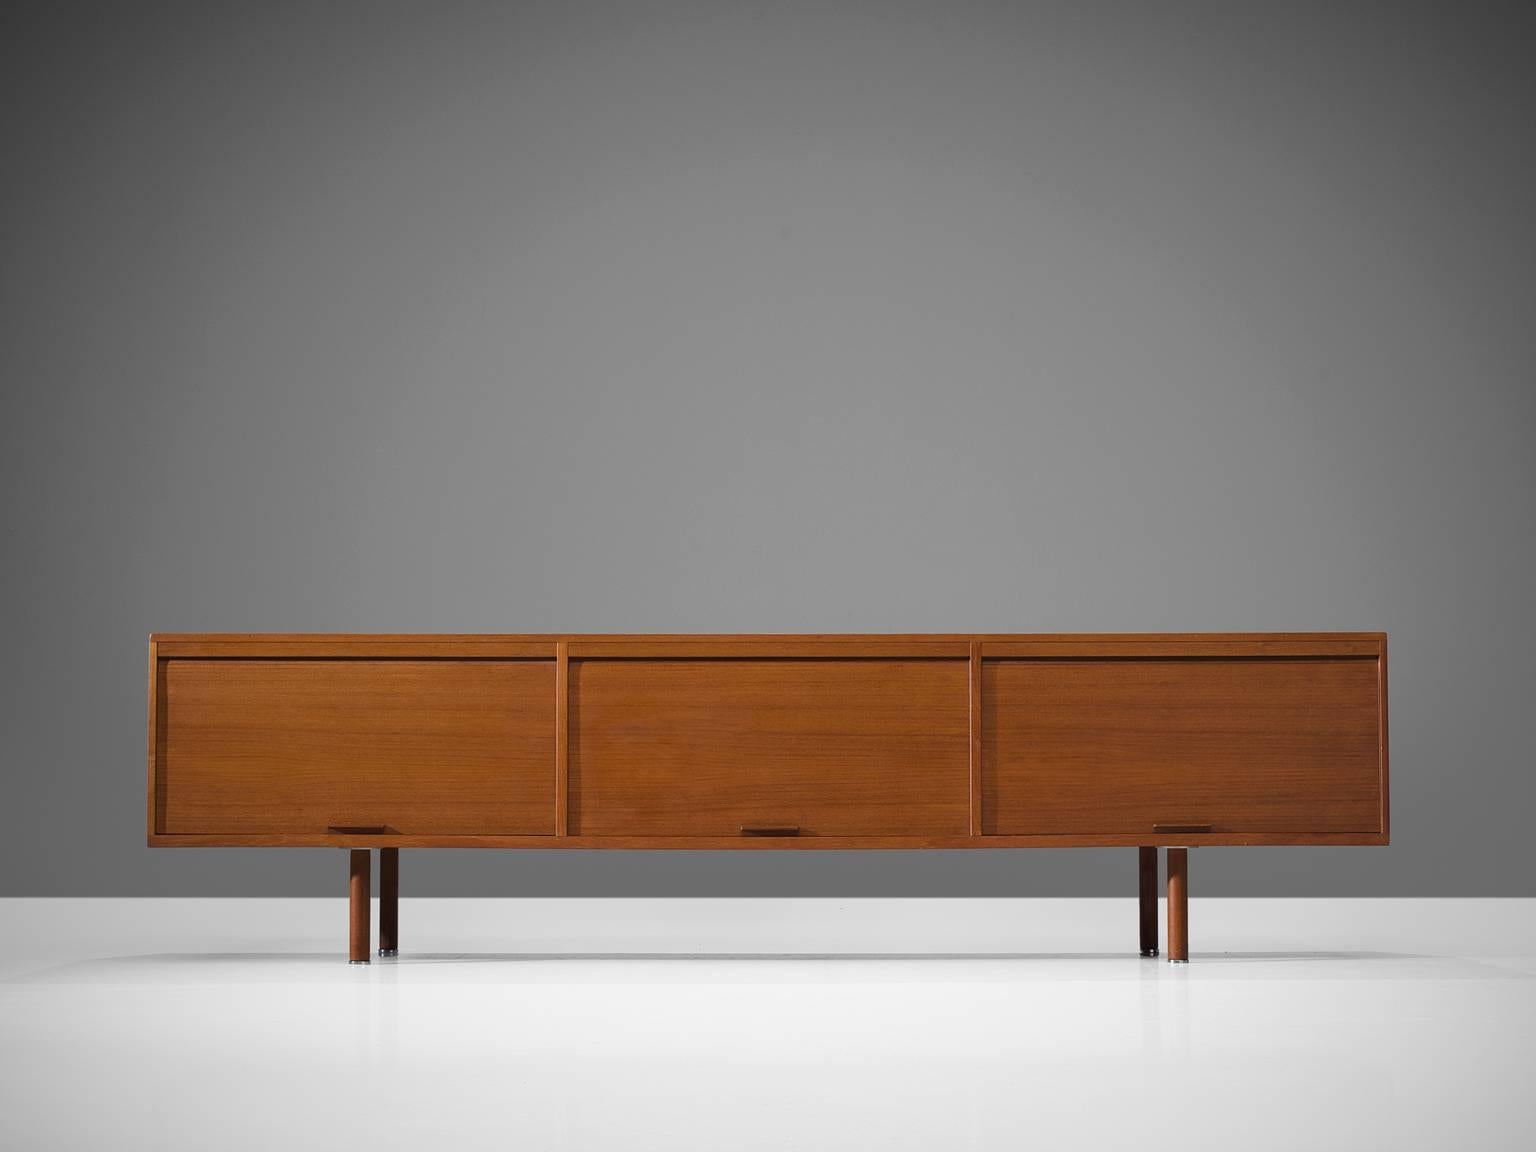 Kai Kristiansen, sideboard, white lacquer, chromed metal, Denmark, 1960s.

This relatively low sideboard is designed by Kai Kristiansen for Feldballes Møbelfabrik. The sideboard features three tambour doors and the interior features white